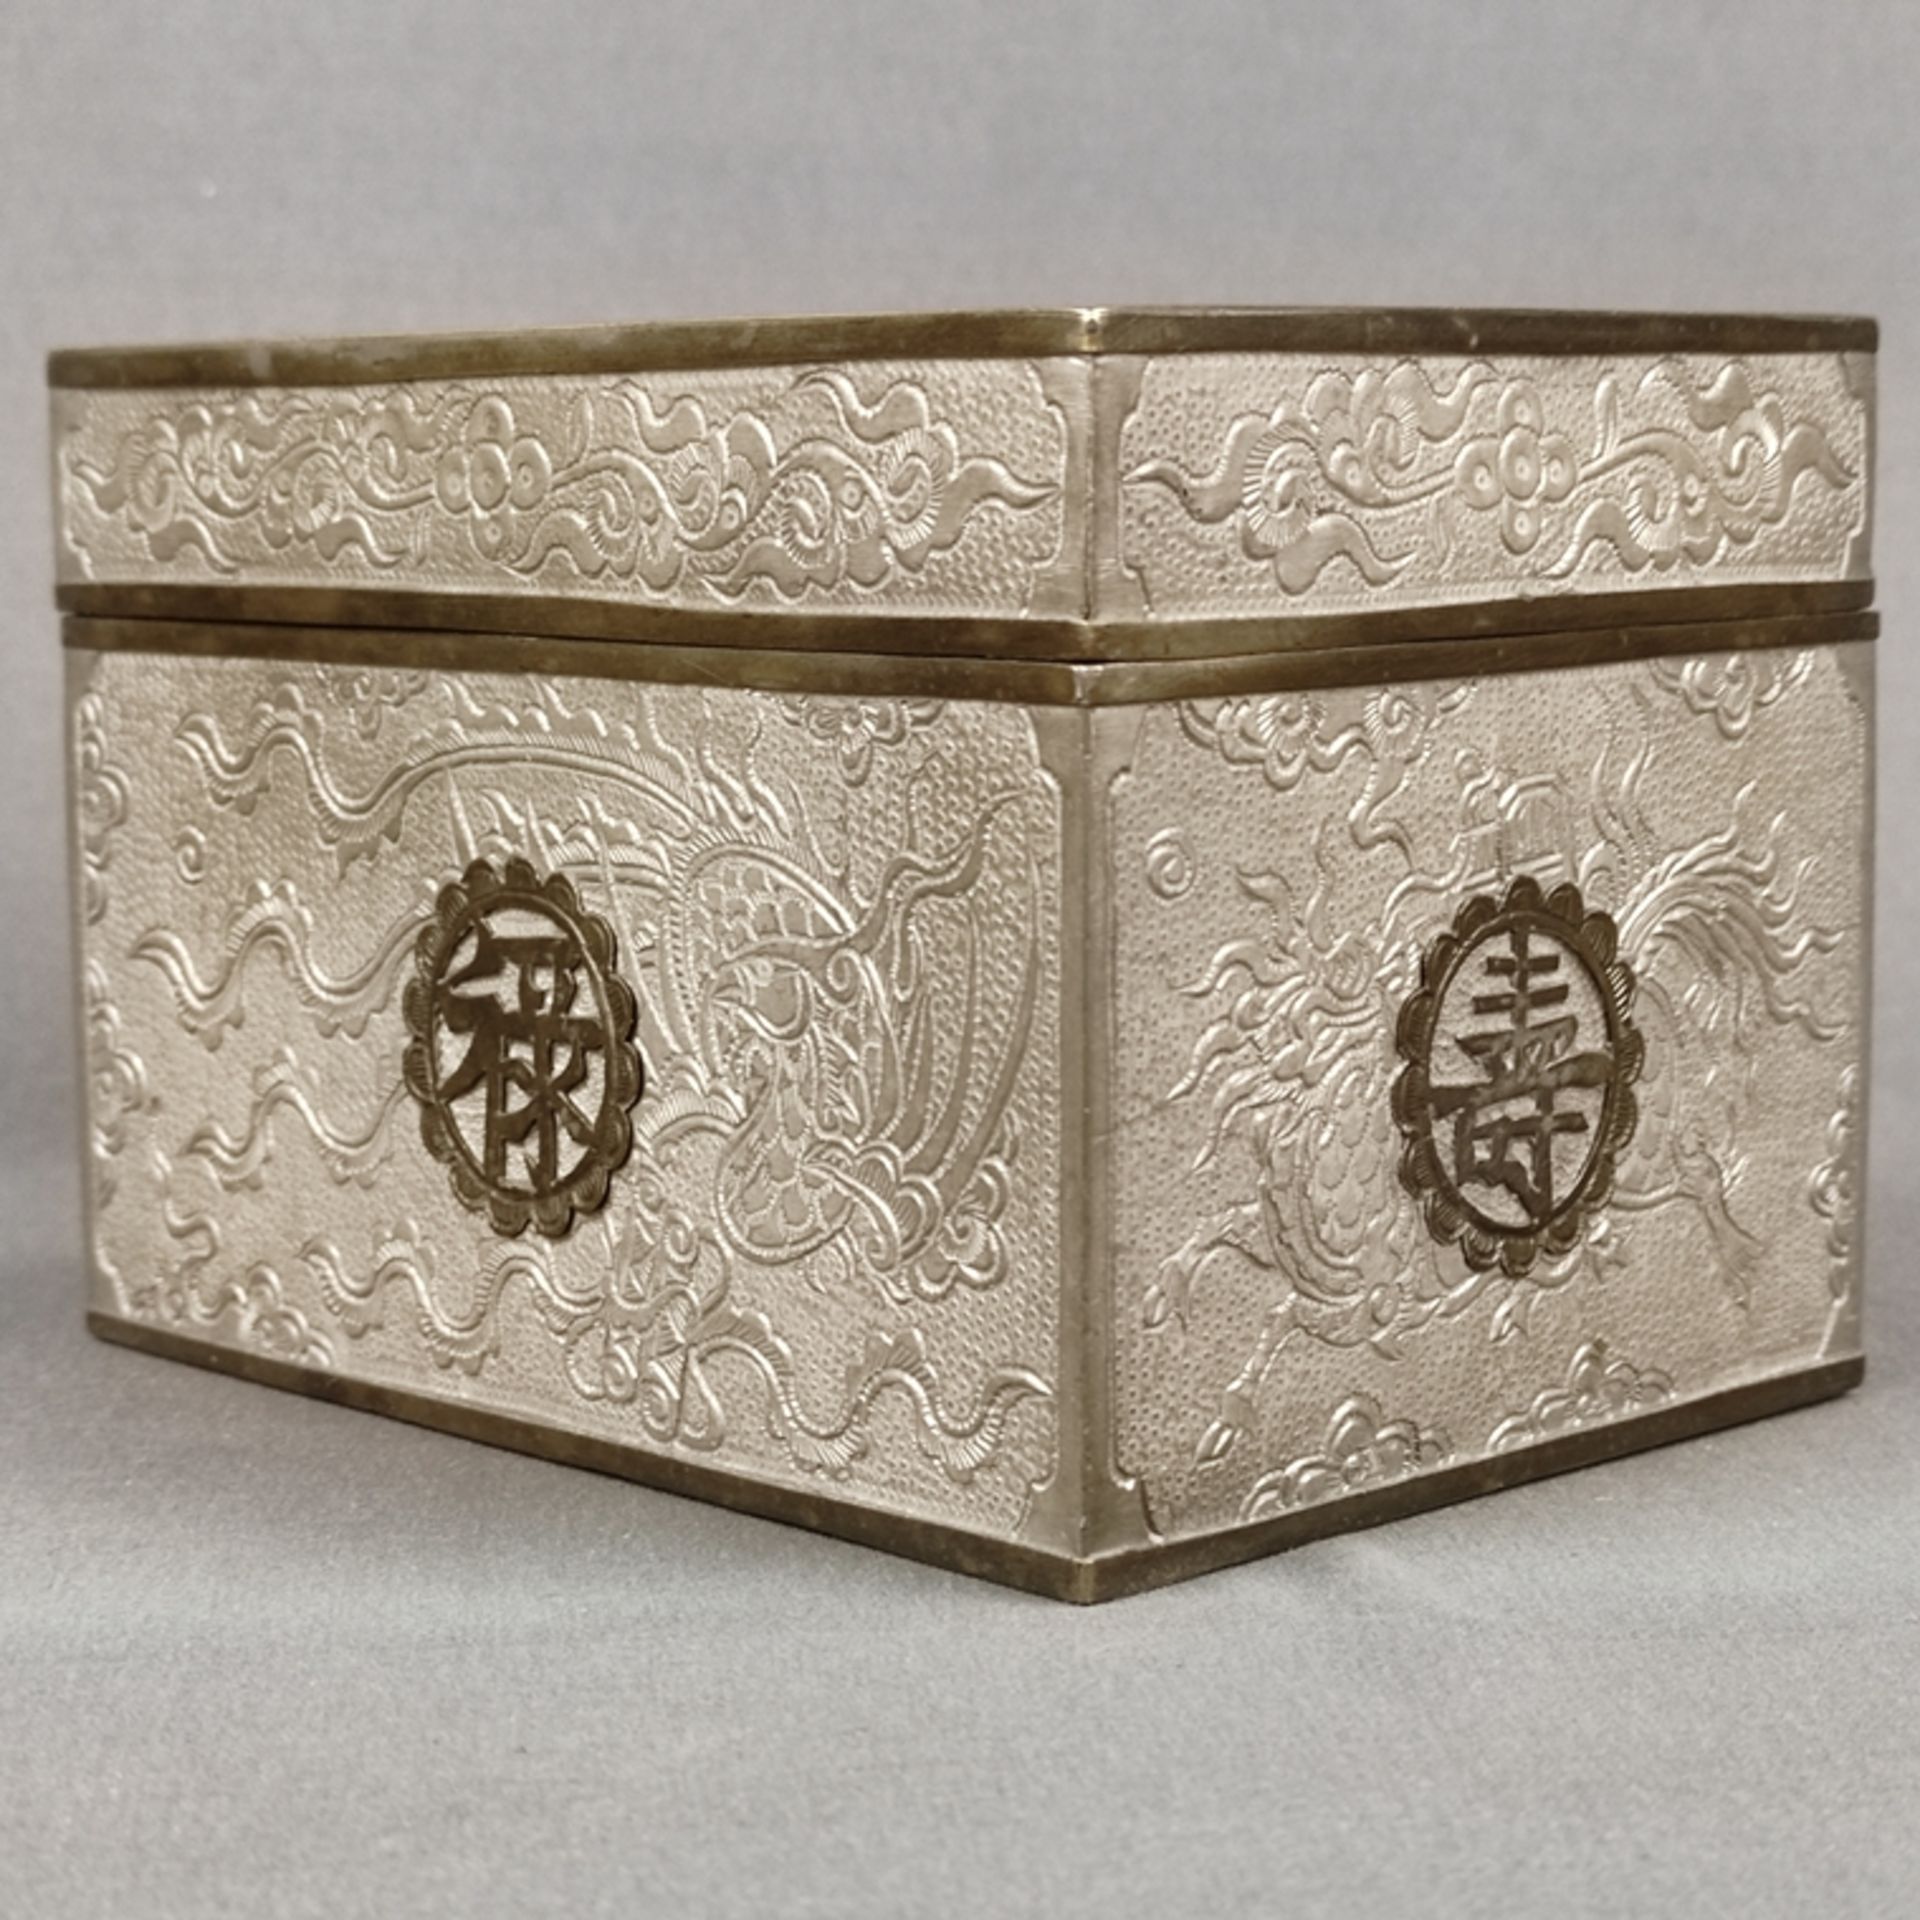 Tea caddy, China, pewter, relief decoration with floral motives and dragons, on each side writing c - Image 5 of 5